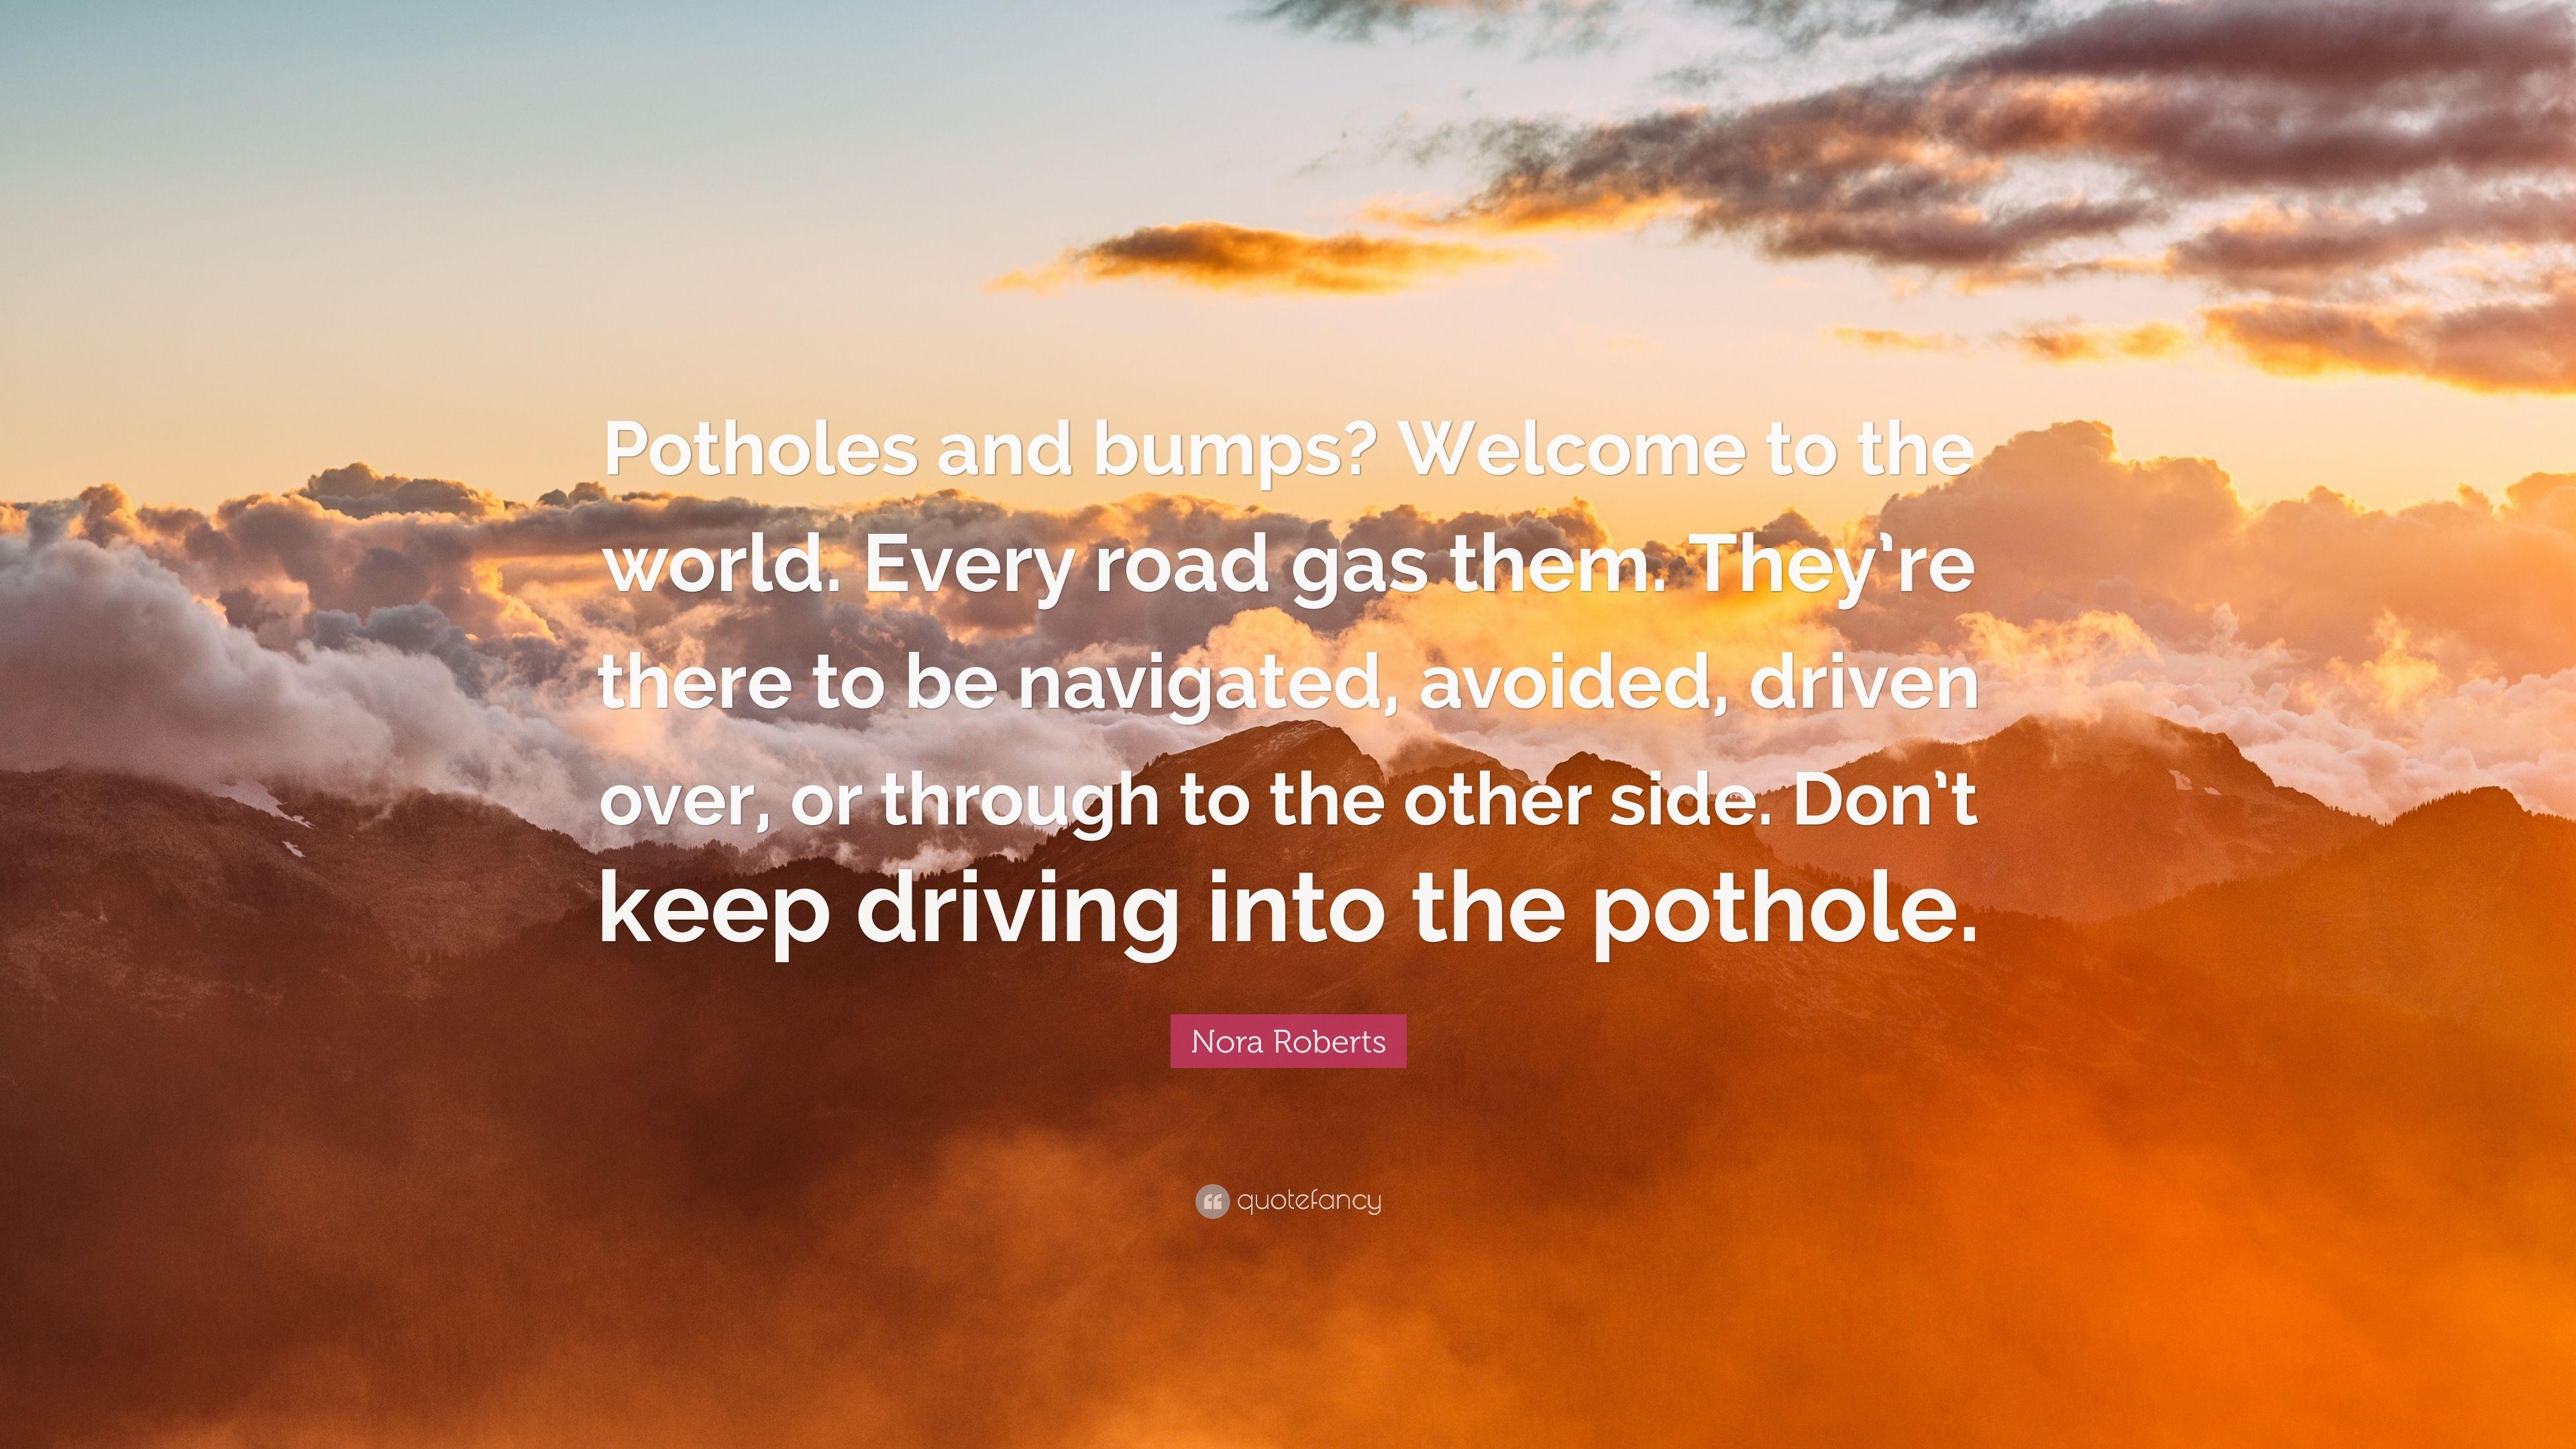 Nora Roberts Quote: “Potholes and bumps? Welcome to the world. Every